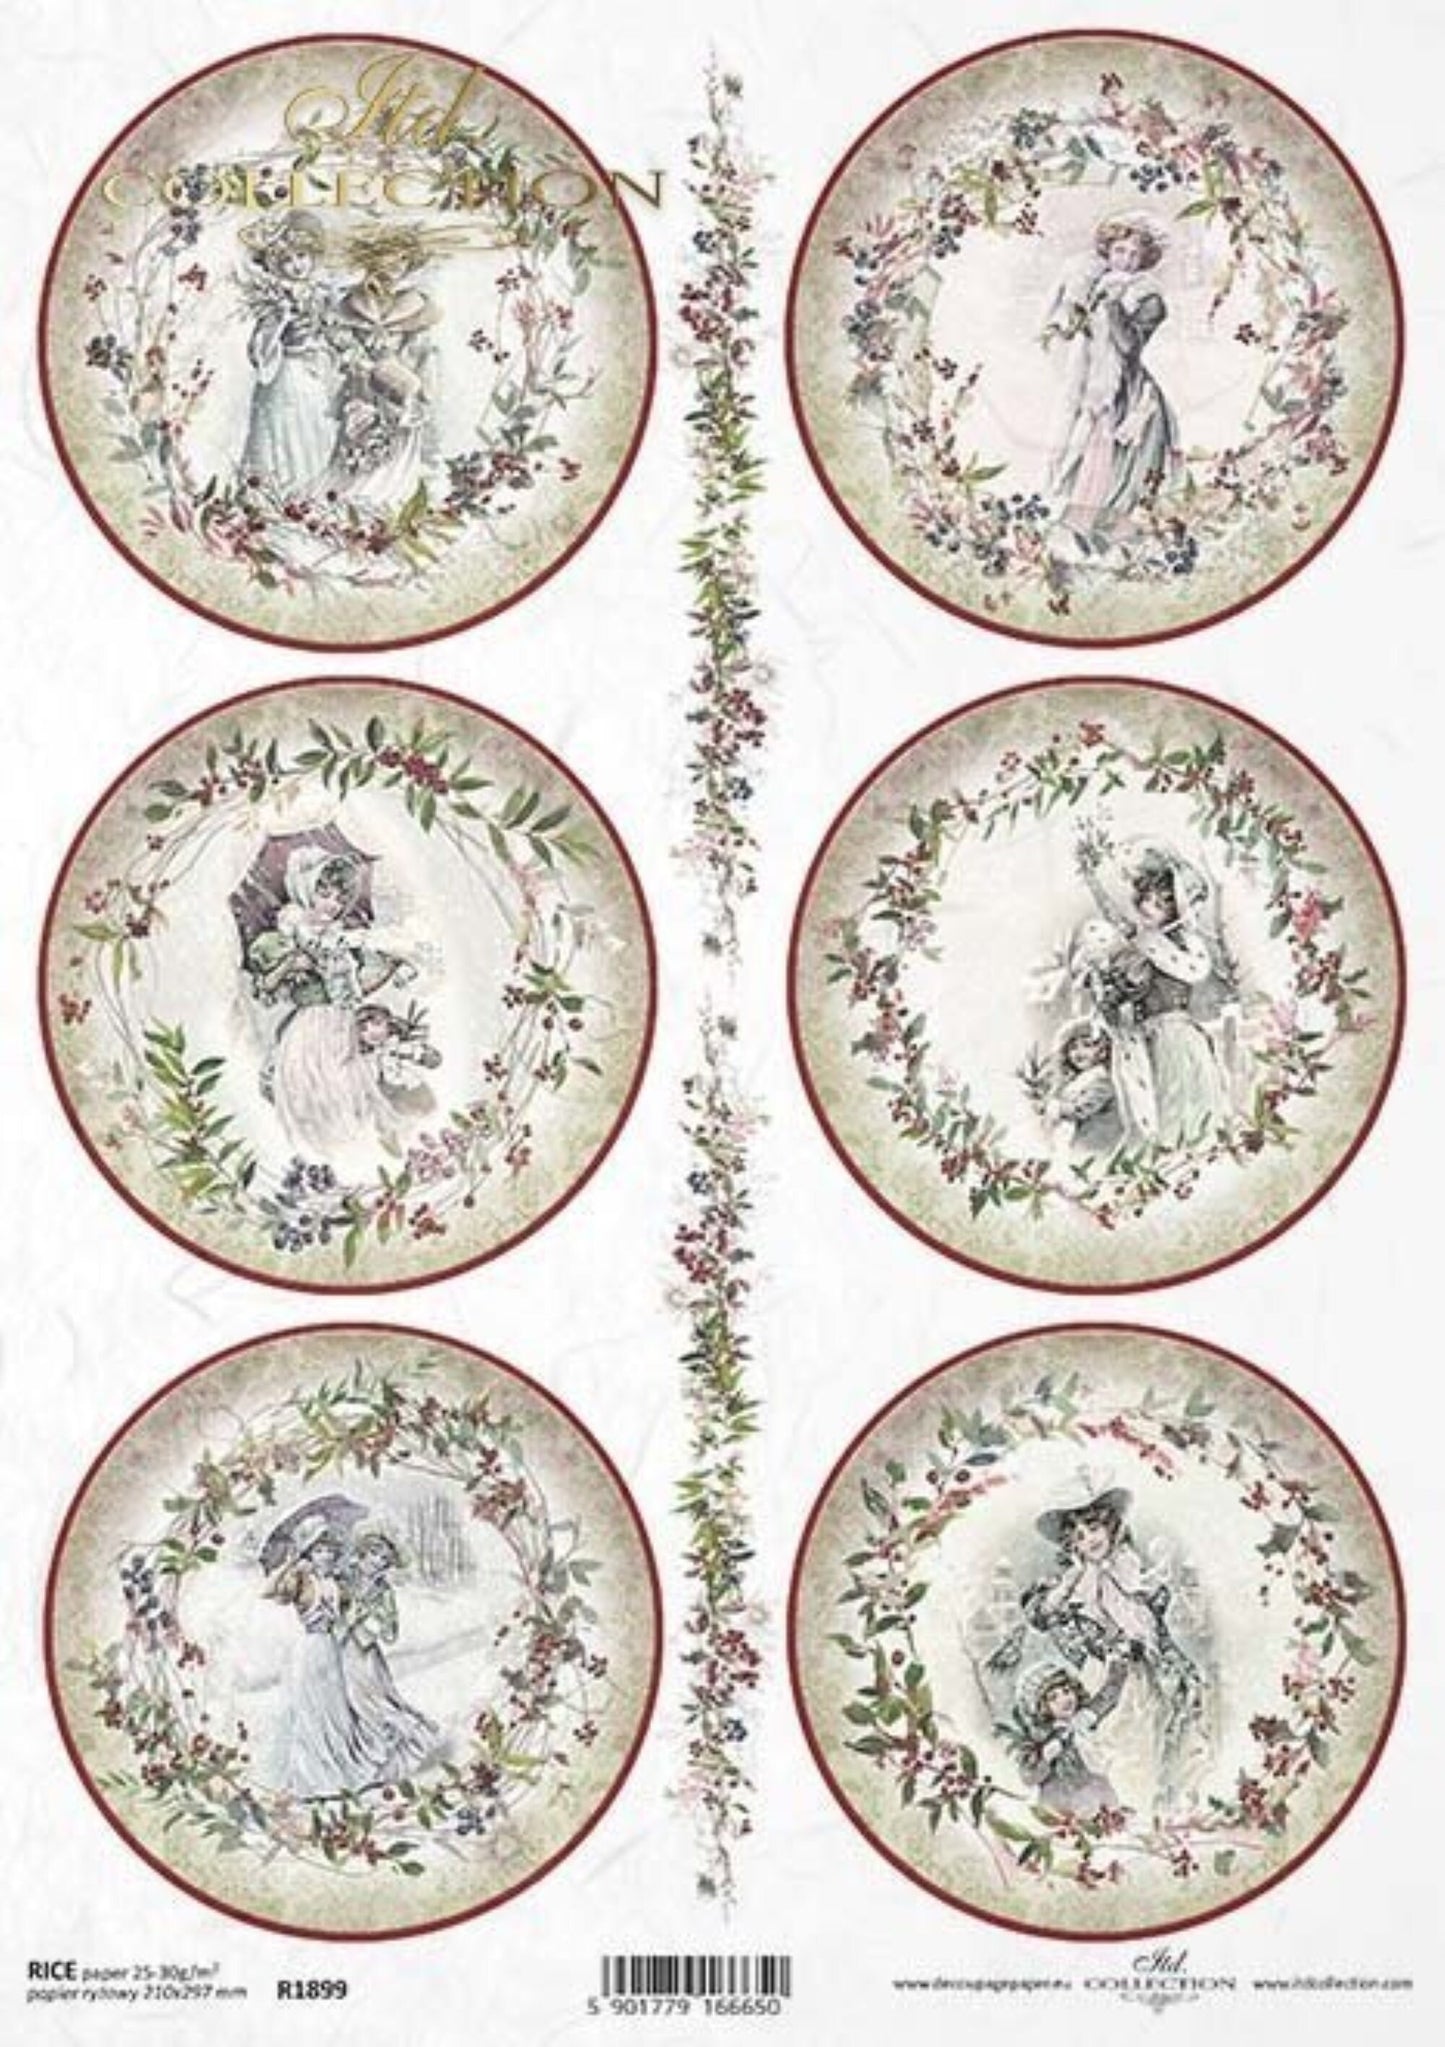 ITD Collection Rice Paper for Decoupage R1899 Size A4 - 210x297 mm, 8.27x11.7 inch, Christmas Rounds, Victorian, women, vintage, wreaths